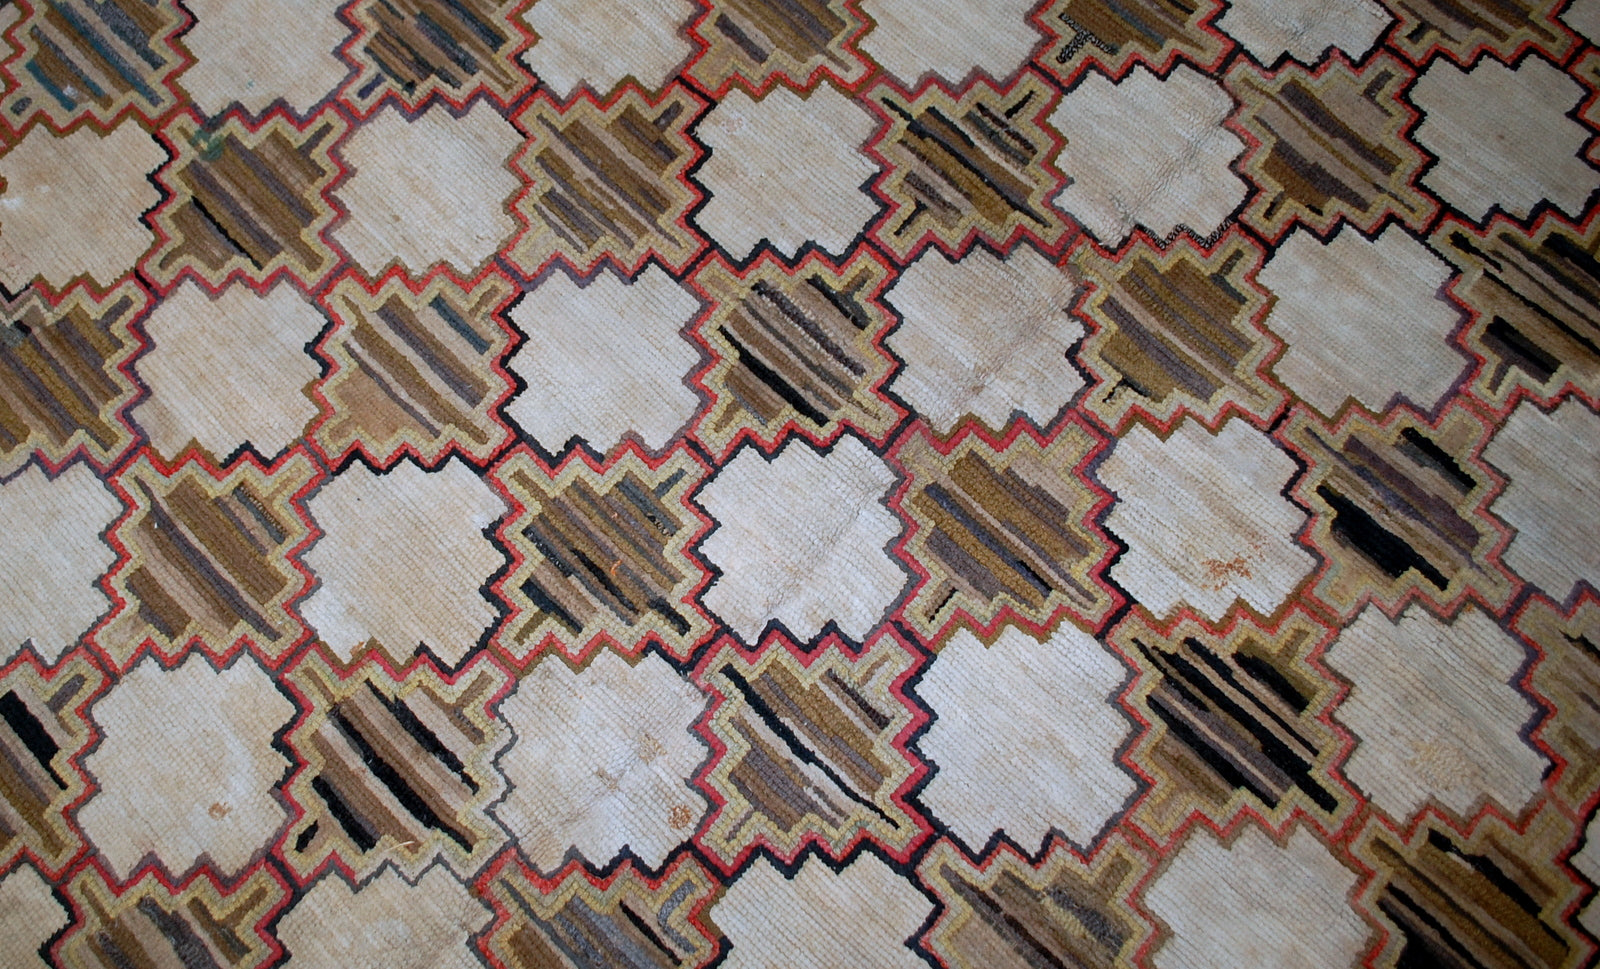 Antique geometric American hooked rug from the end of 19th century. It is in good condition, made out of wool.